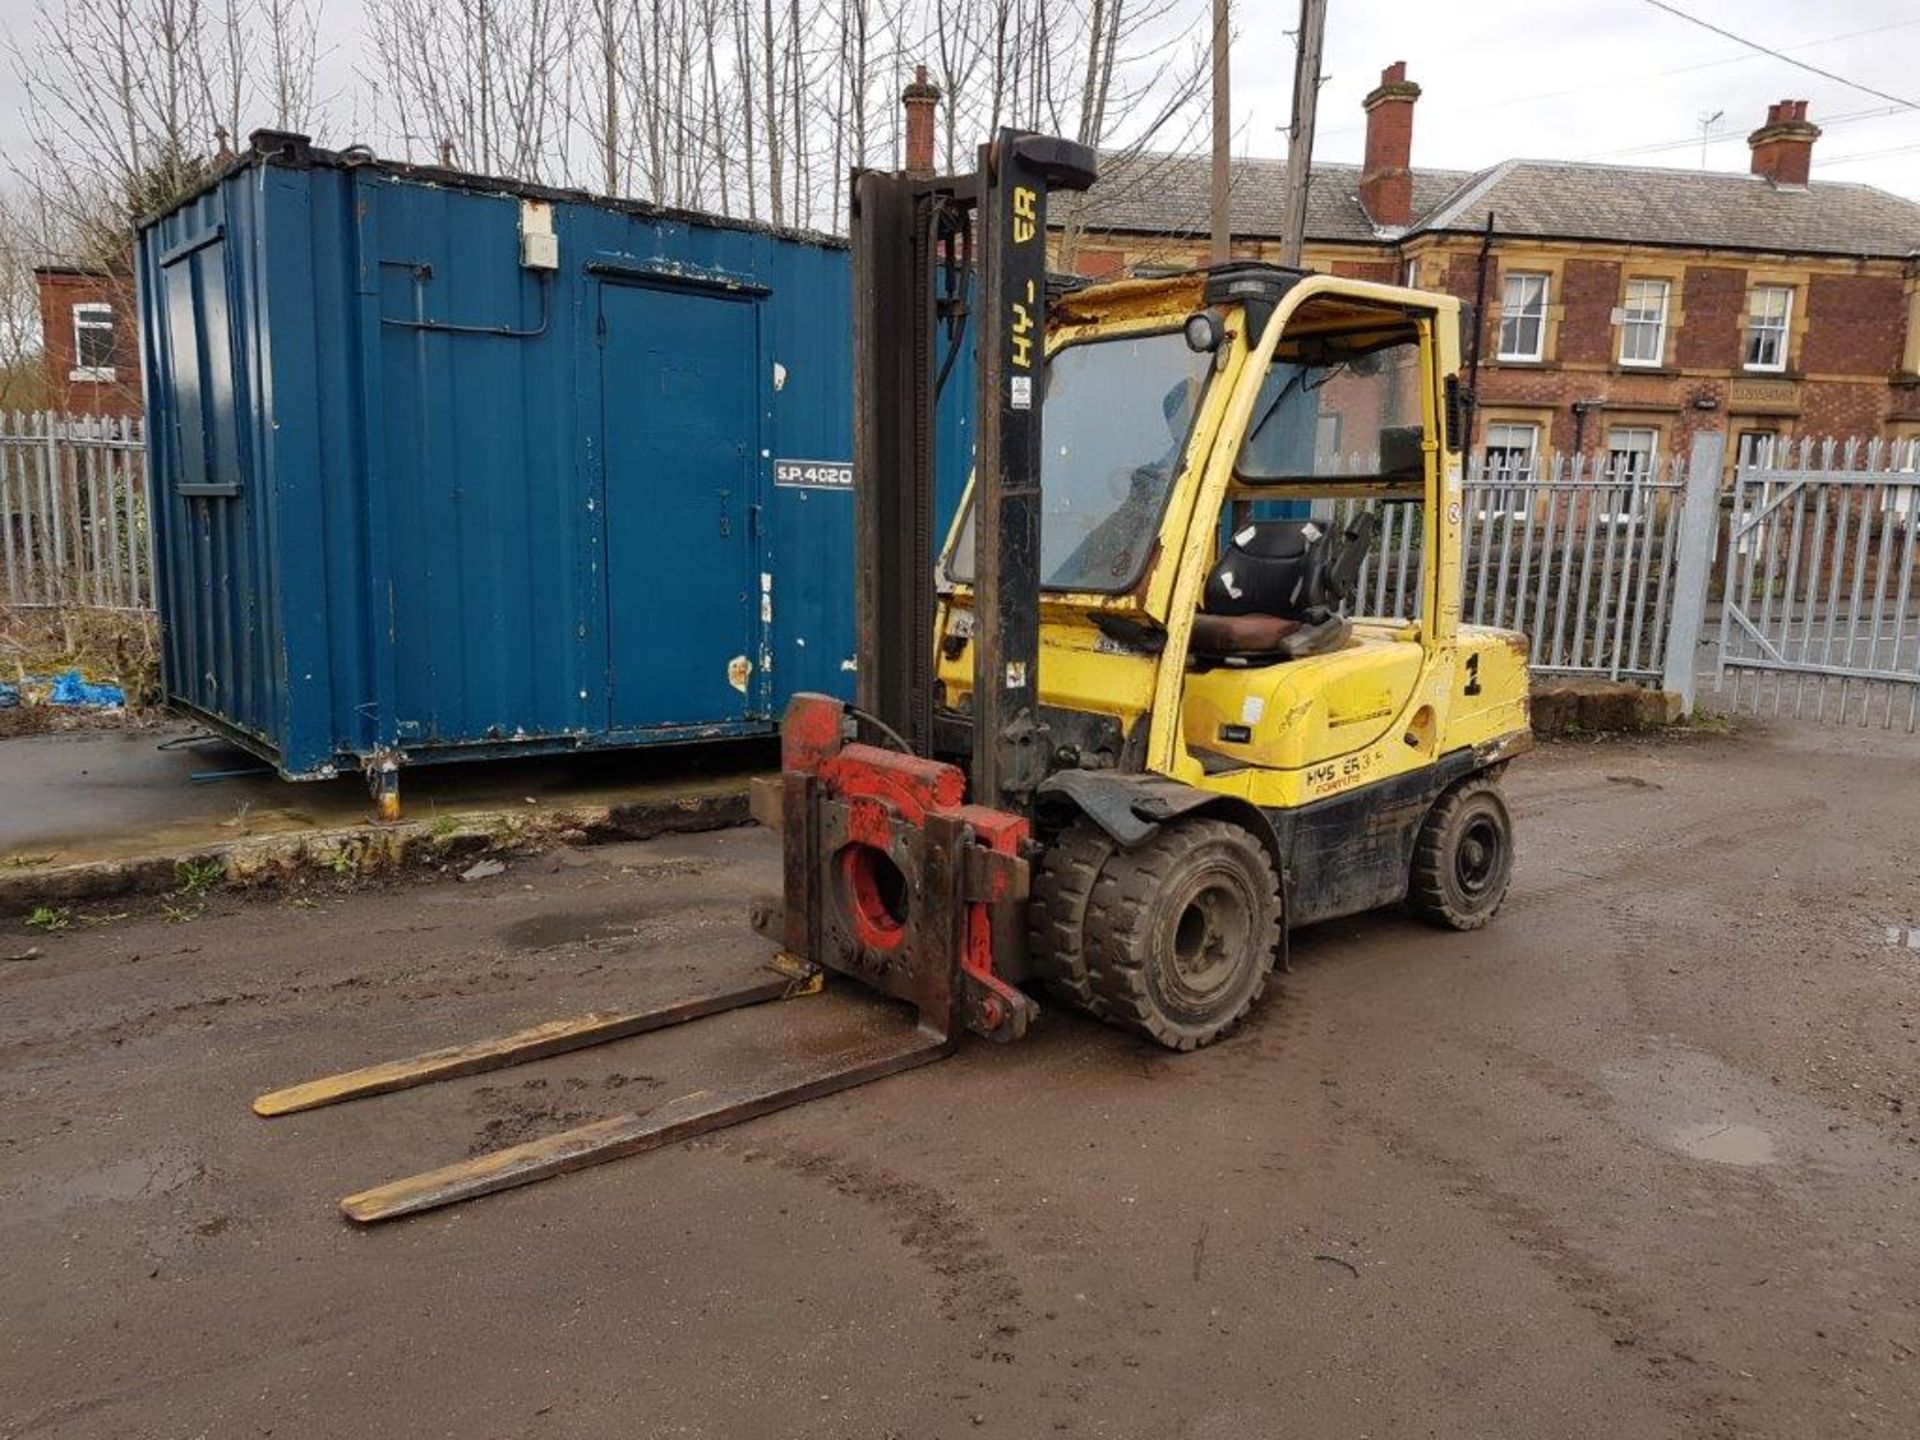 Hyster H35D Forklift 2007, good condition 3.5 tonne diesel truck with rotating forks - Image 2 of 2